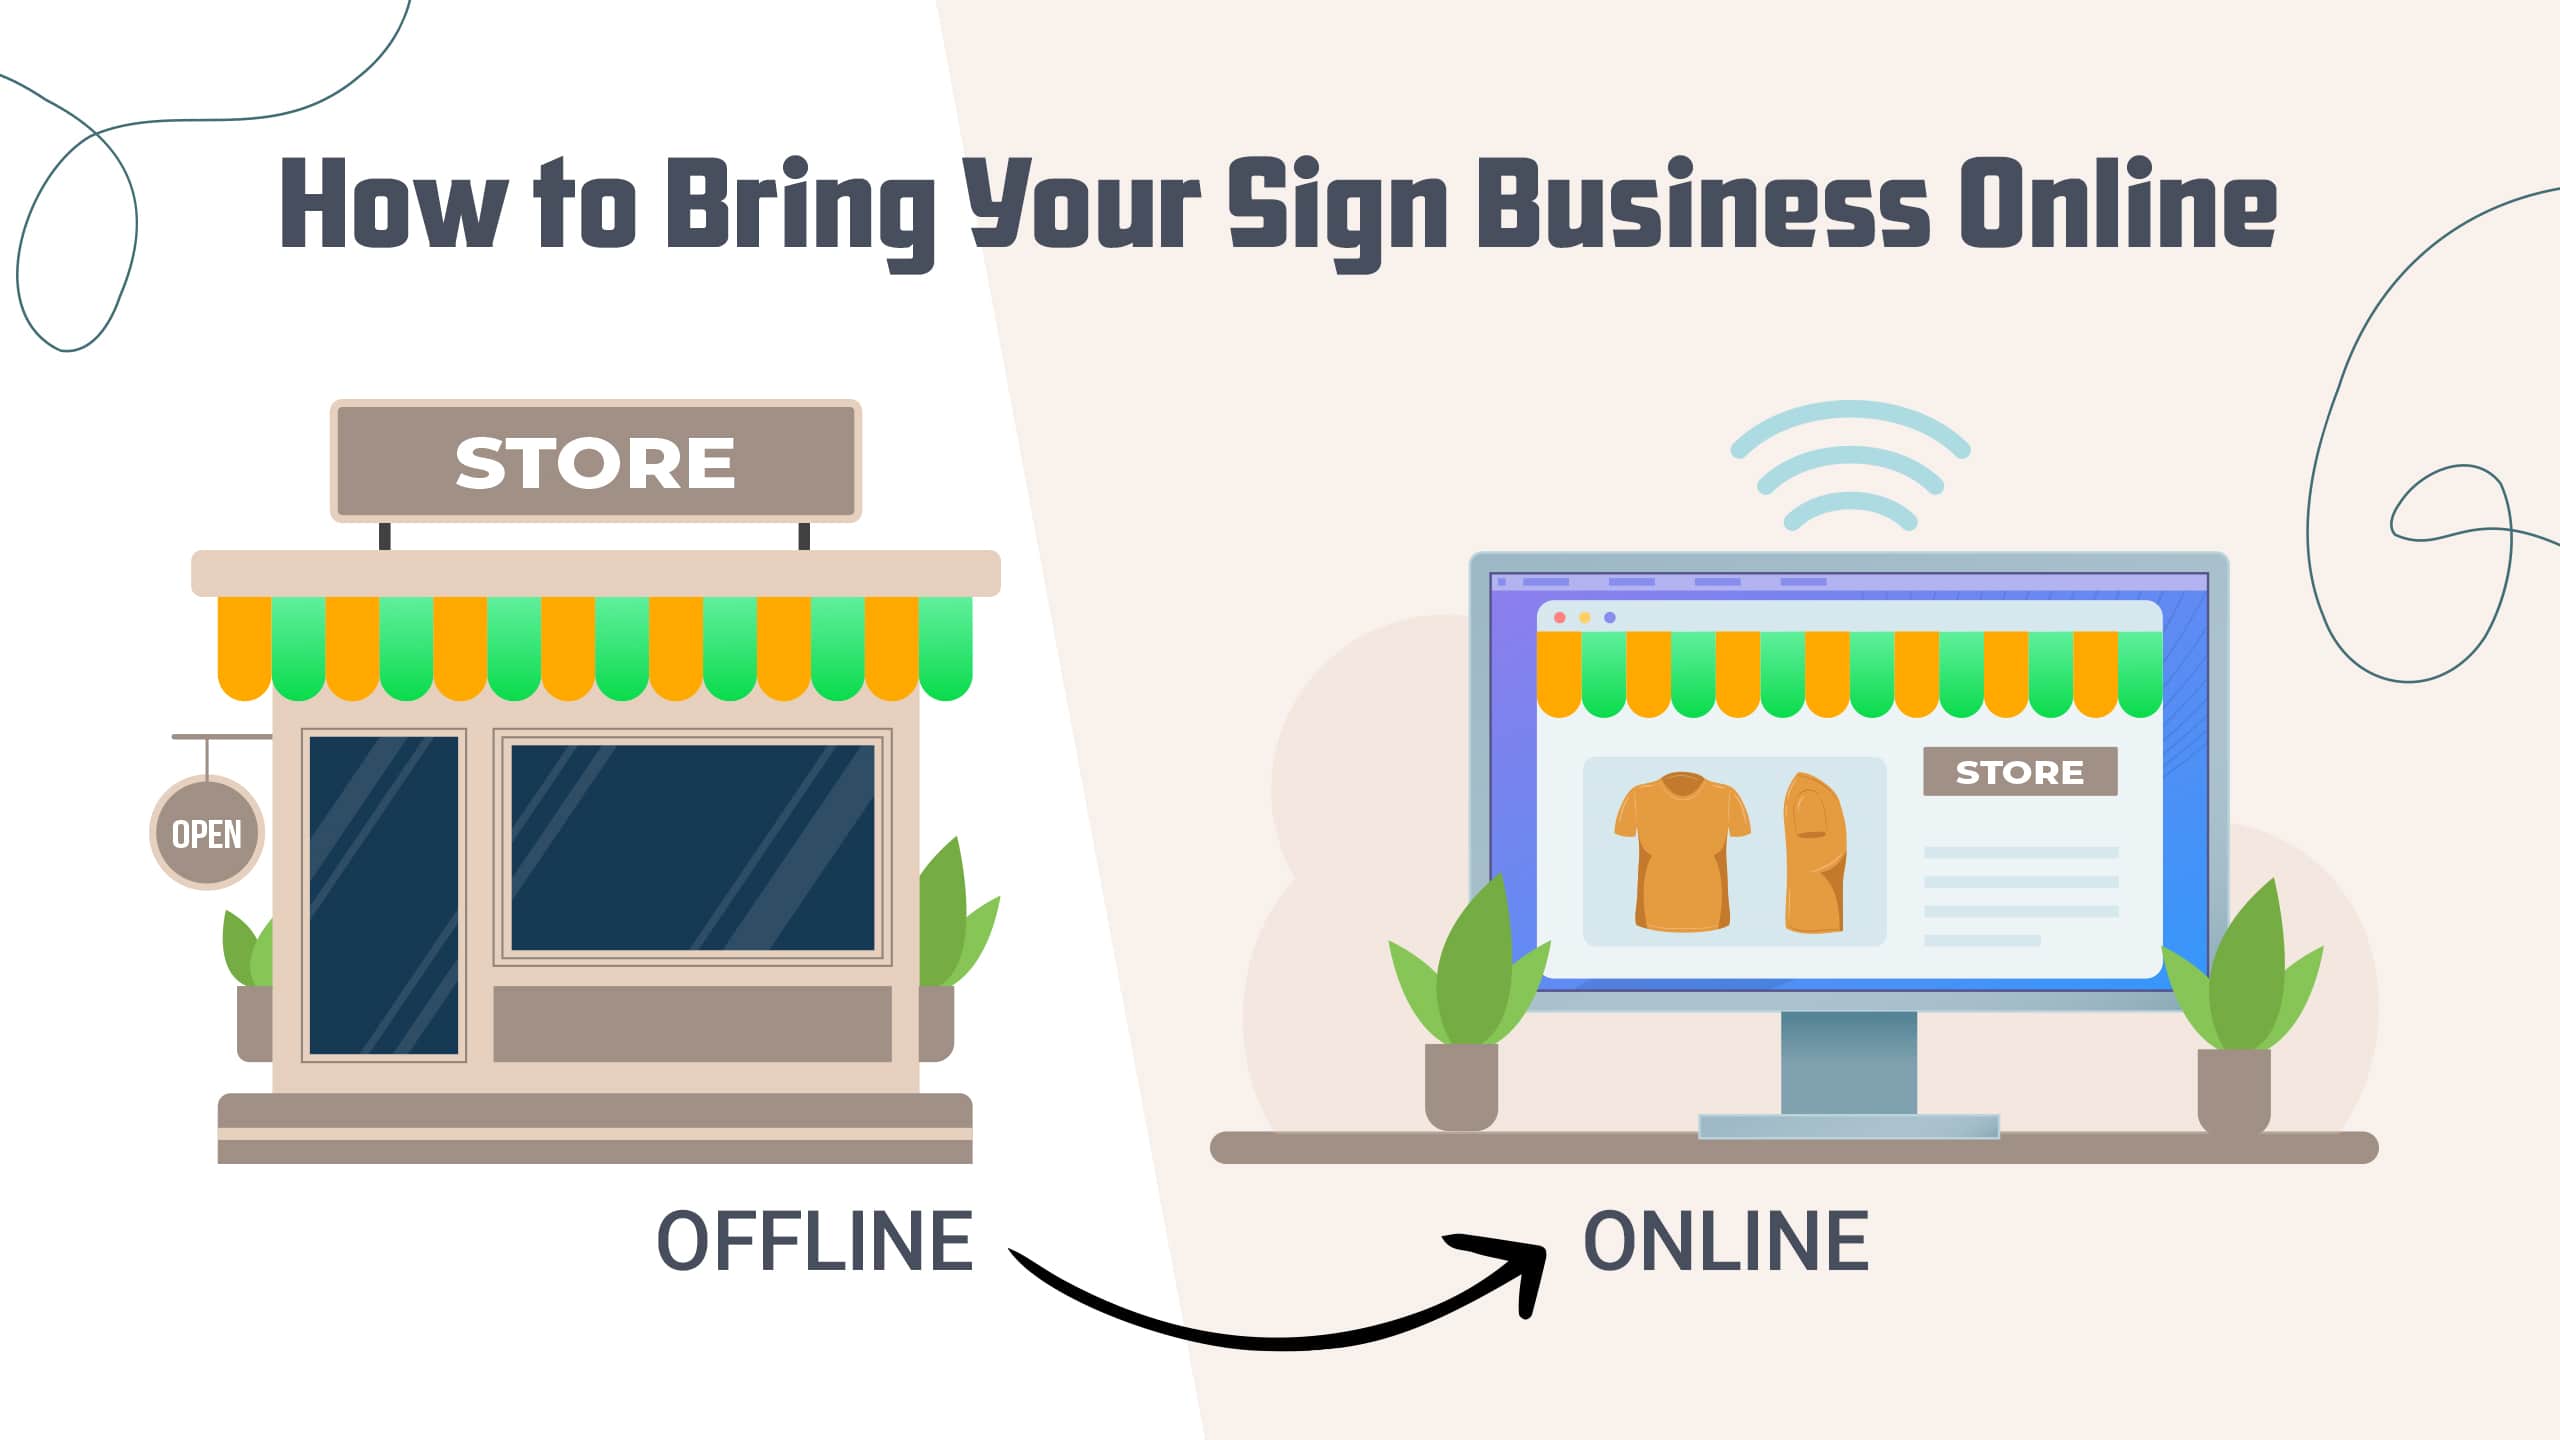 How to Bring Your Sign Business Online